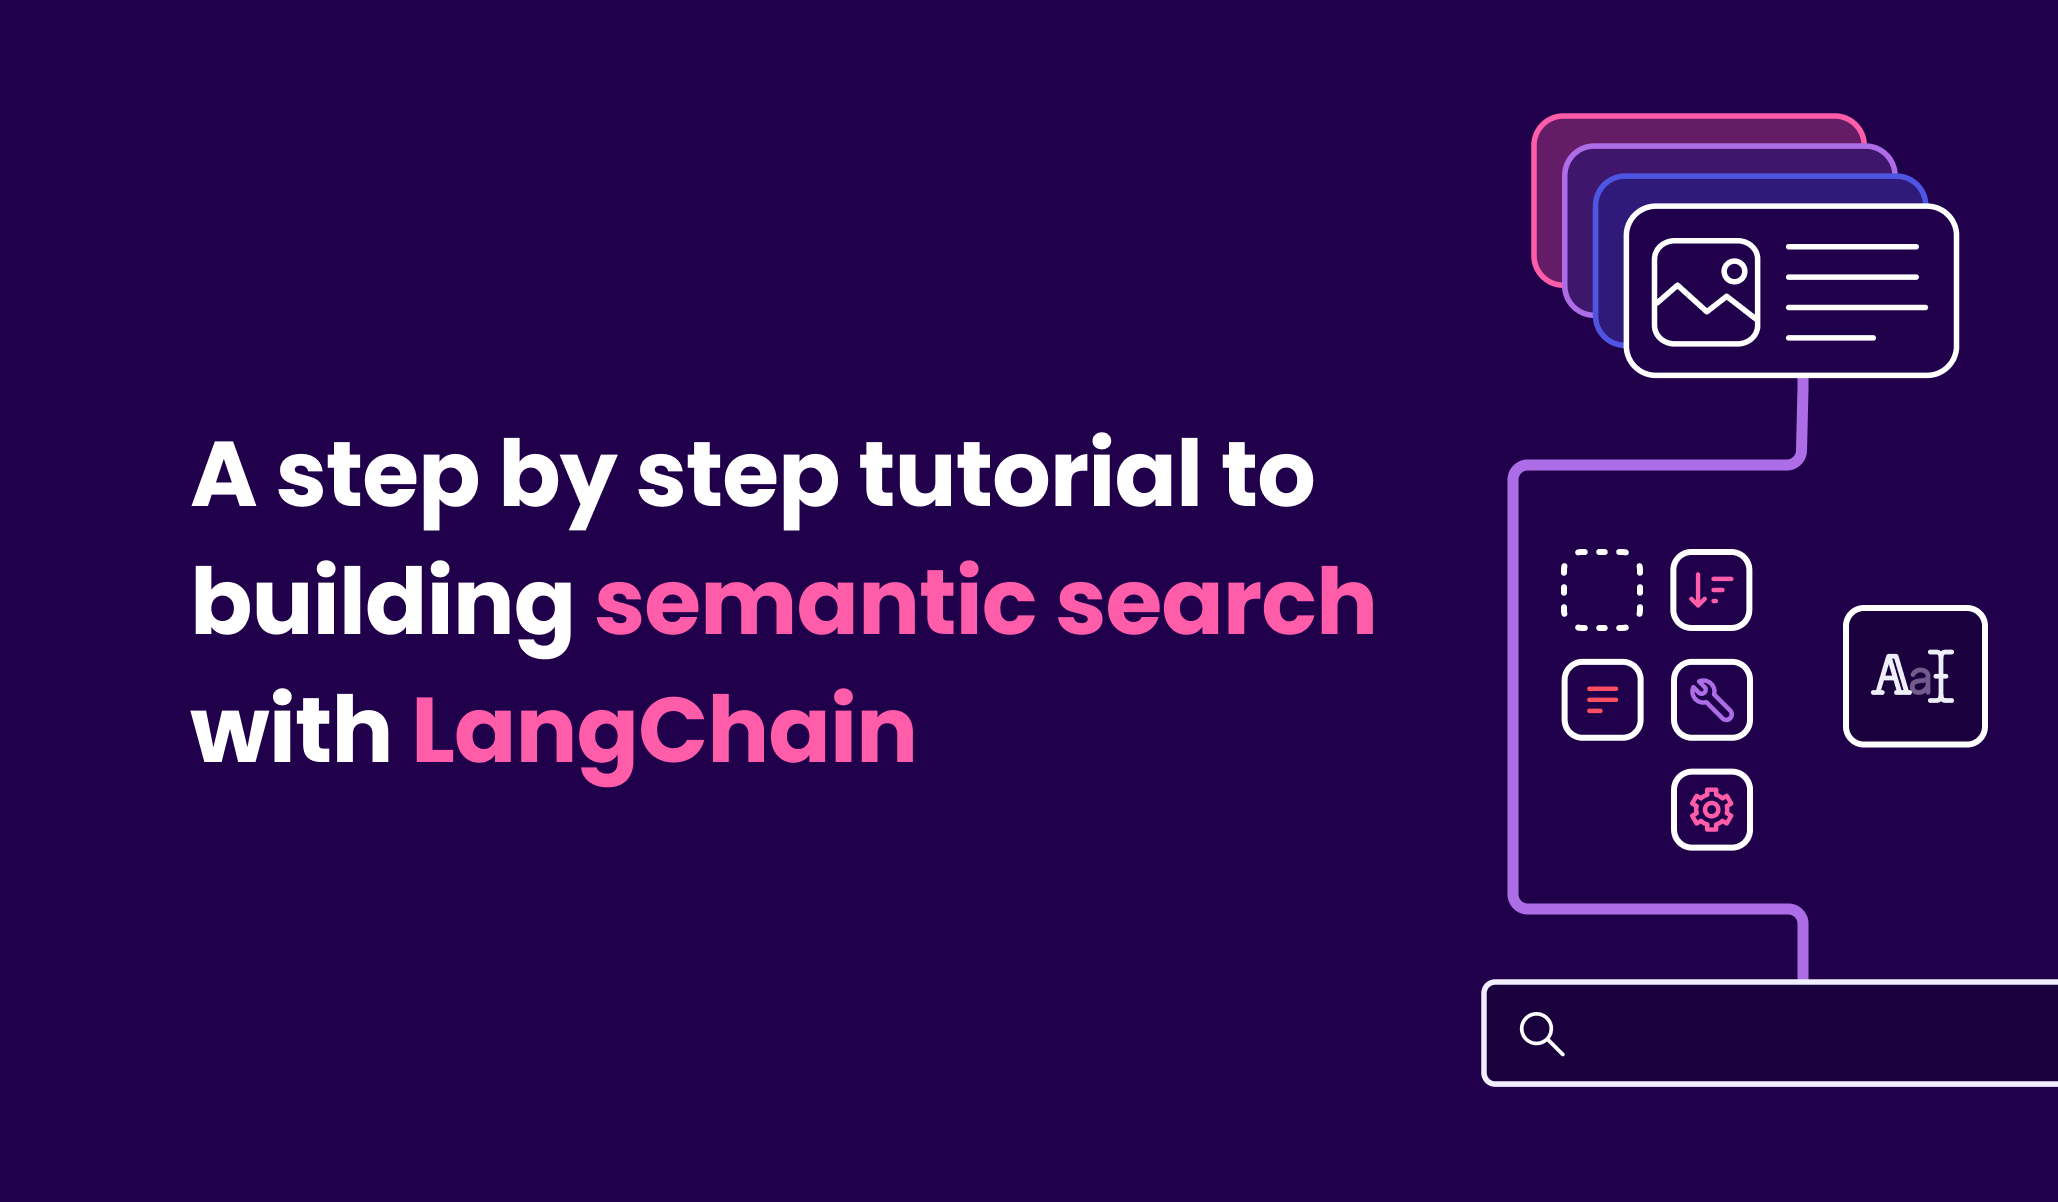 A step-by-step tutorial to building semantic search with LangChain